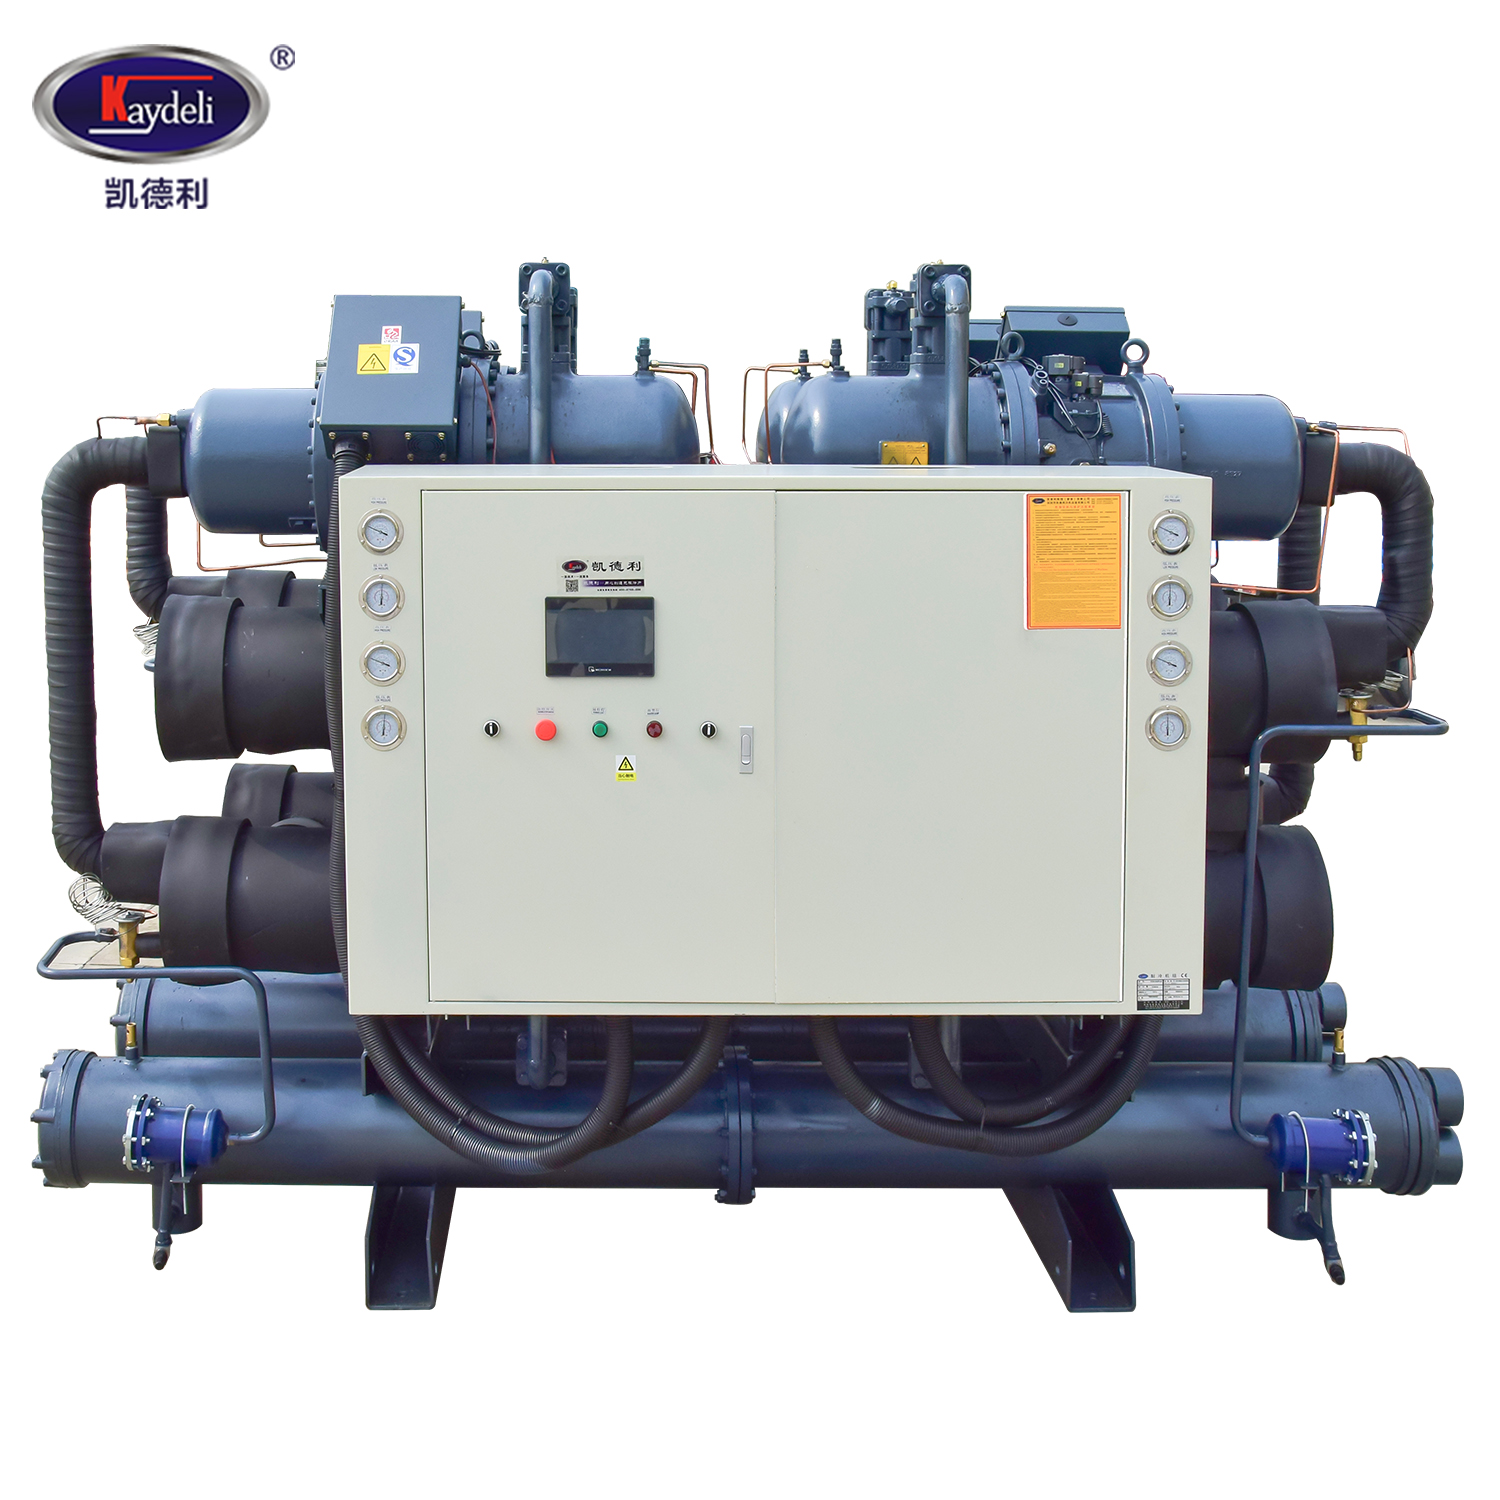 560hp 450ton 460Rt Water Cooled Screw Chiller Specification Chiller For Air Compressor In Hvac